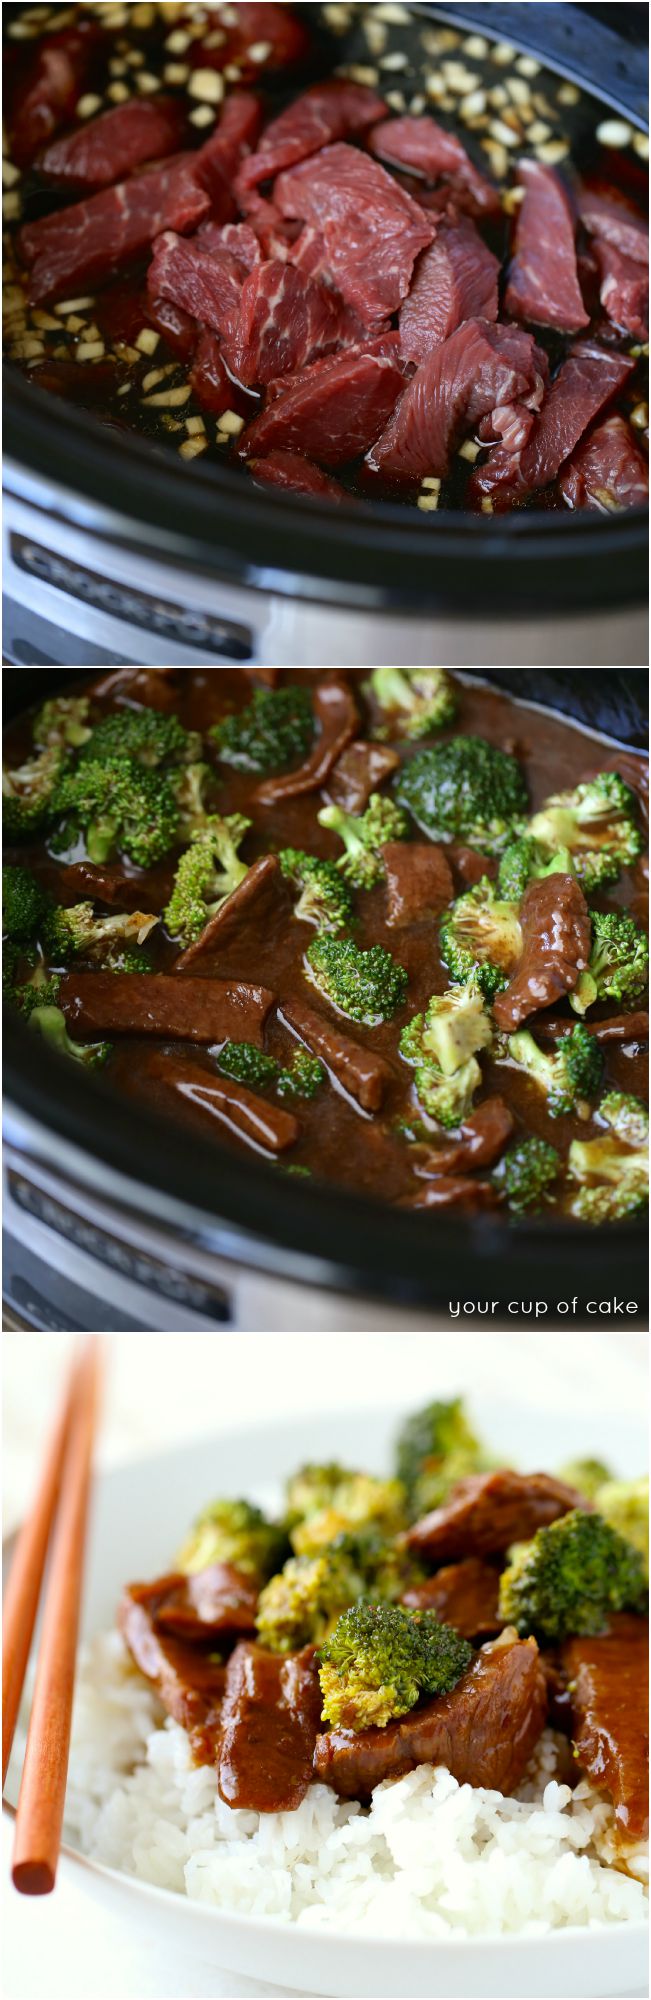 This Beef and Broccoli is better than take-out! And it's made in a slow cooker--so easy! 